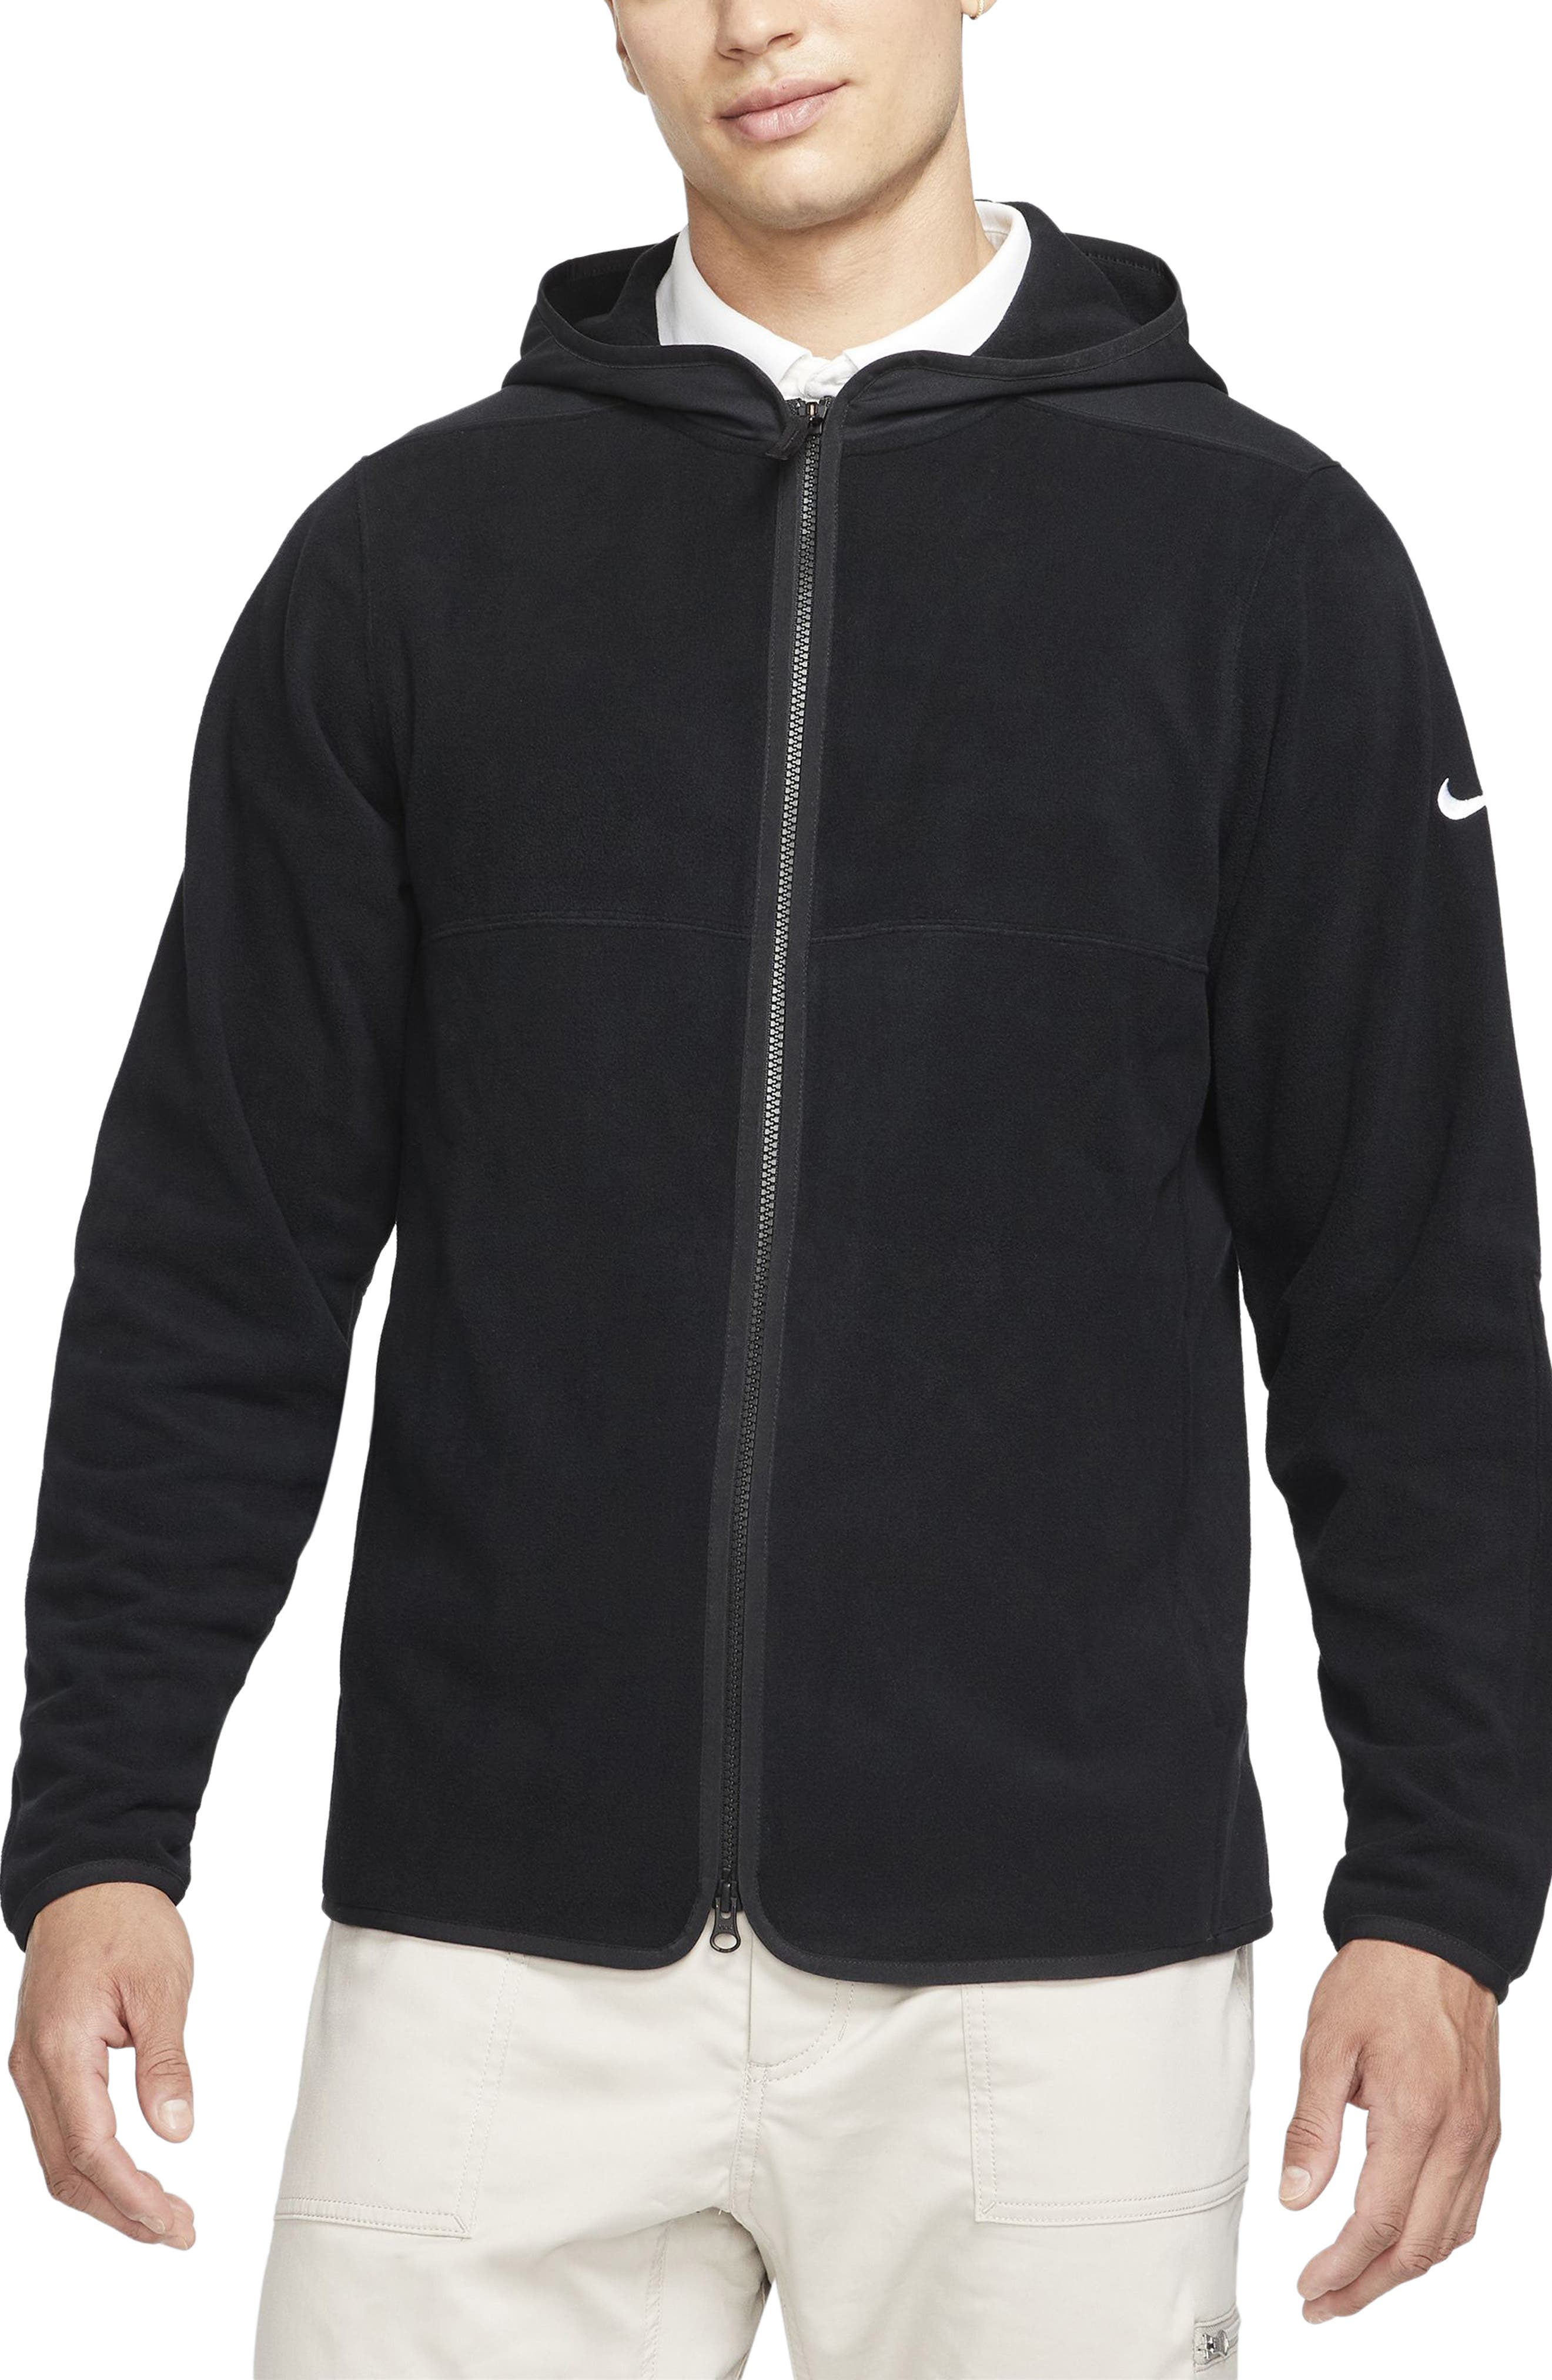 UPC 195240001303 product image for Nike Golf Nike Therma-FIT Victory Zip Golf Hoodie in Black/Black/Black/White at  | upcitemdb.com